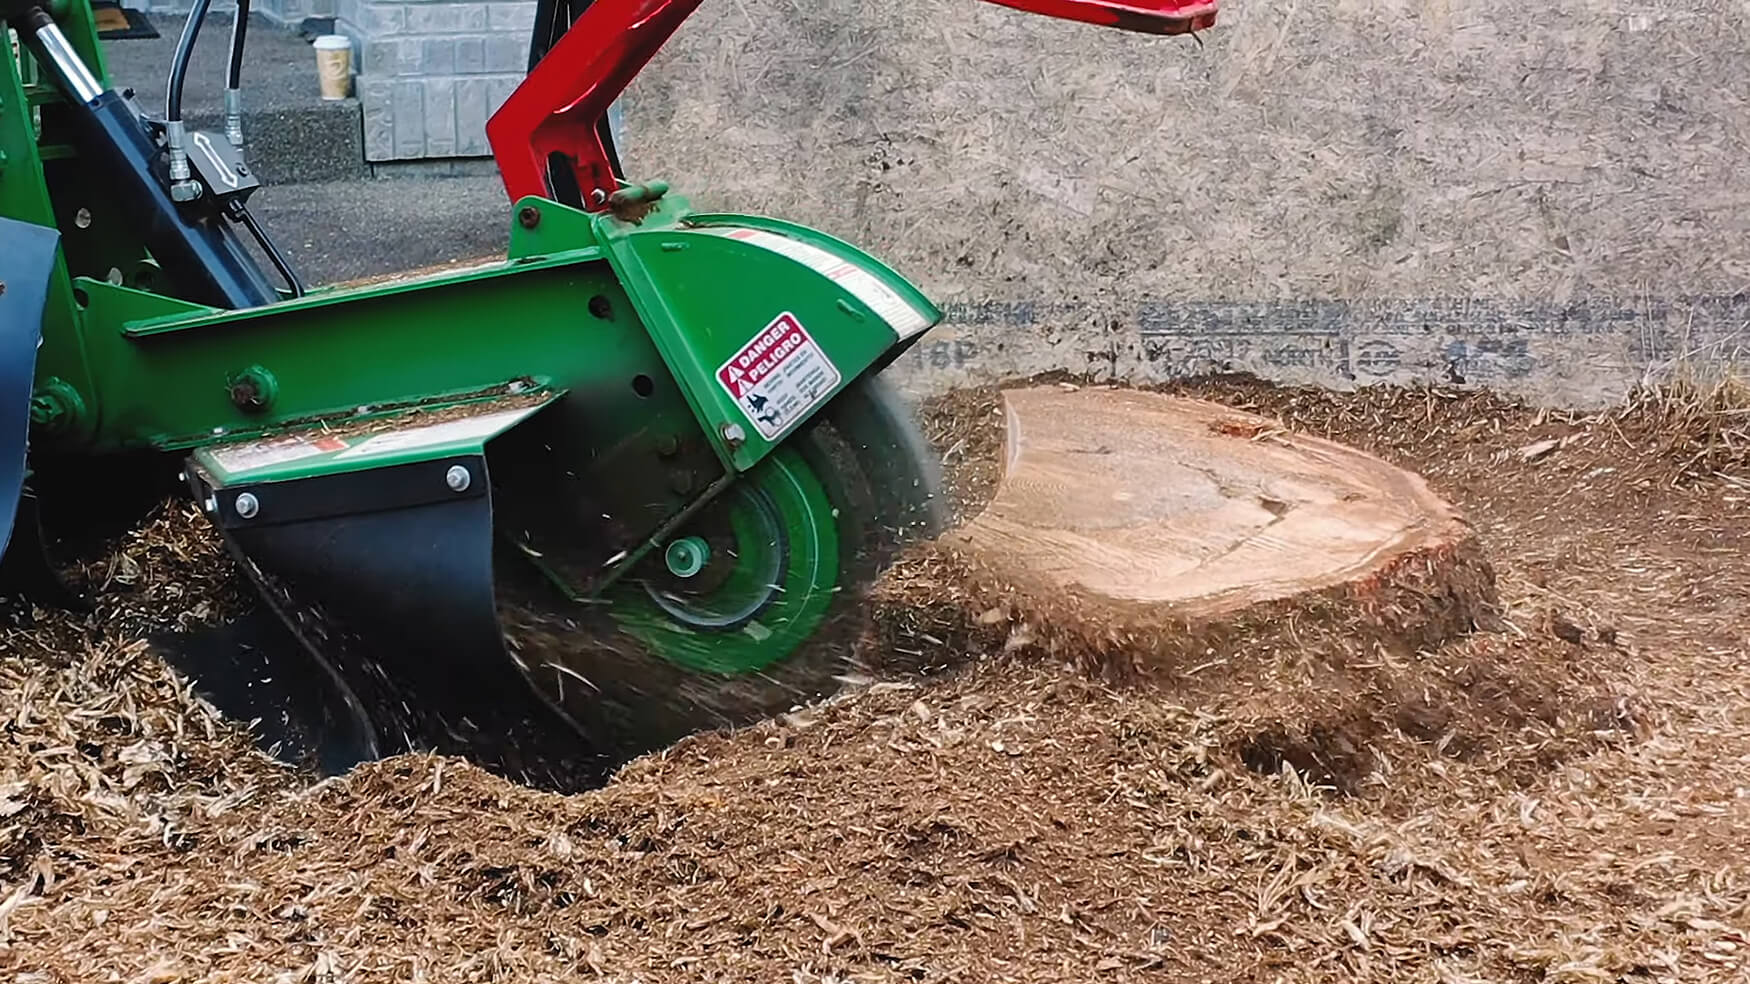 Smart Tree Service provides hood-river stump grinding services